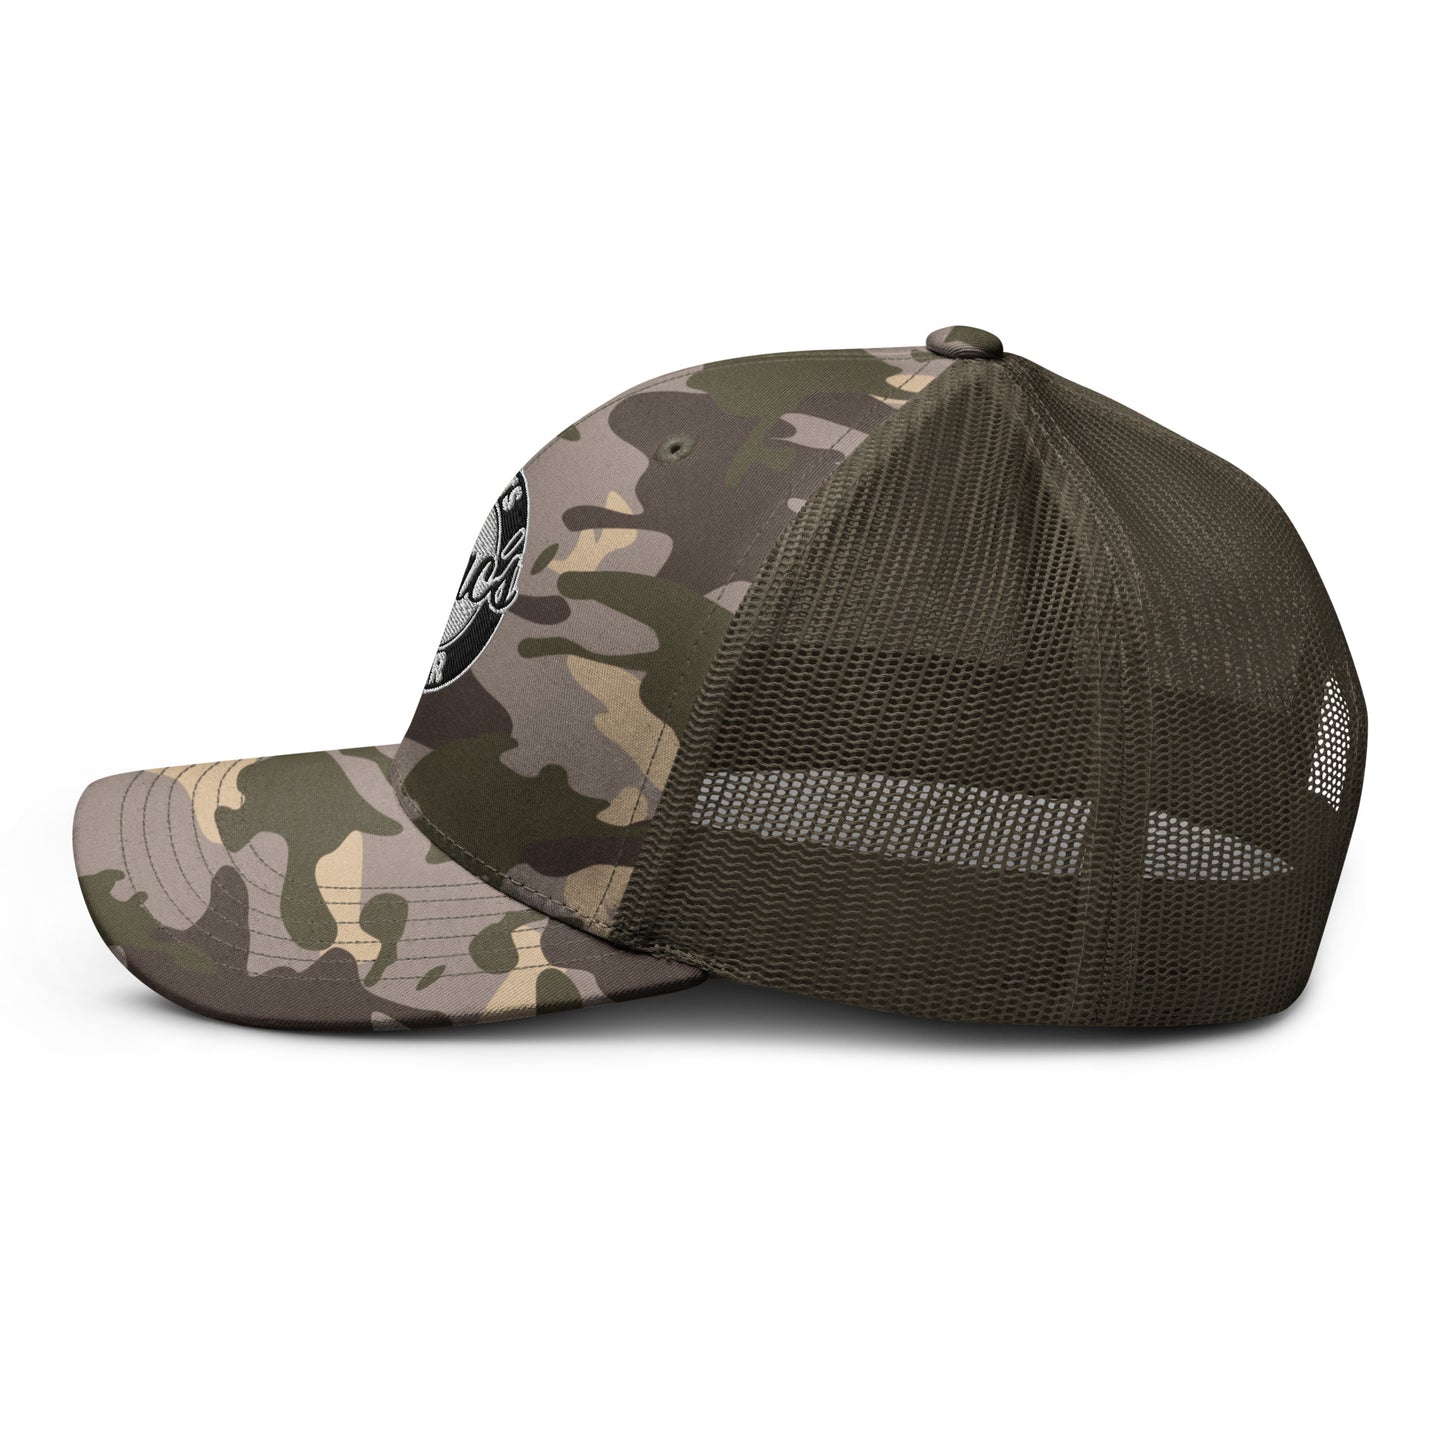 Isaac's Camouflage Hat